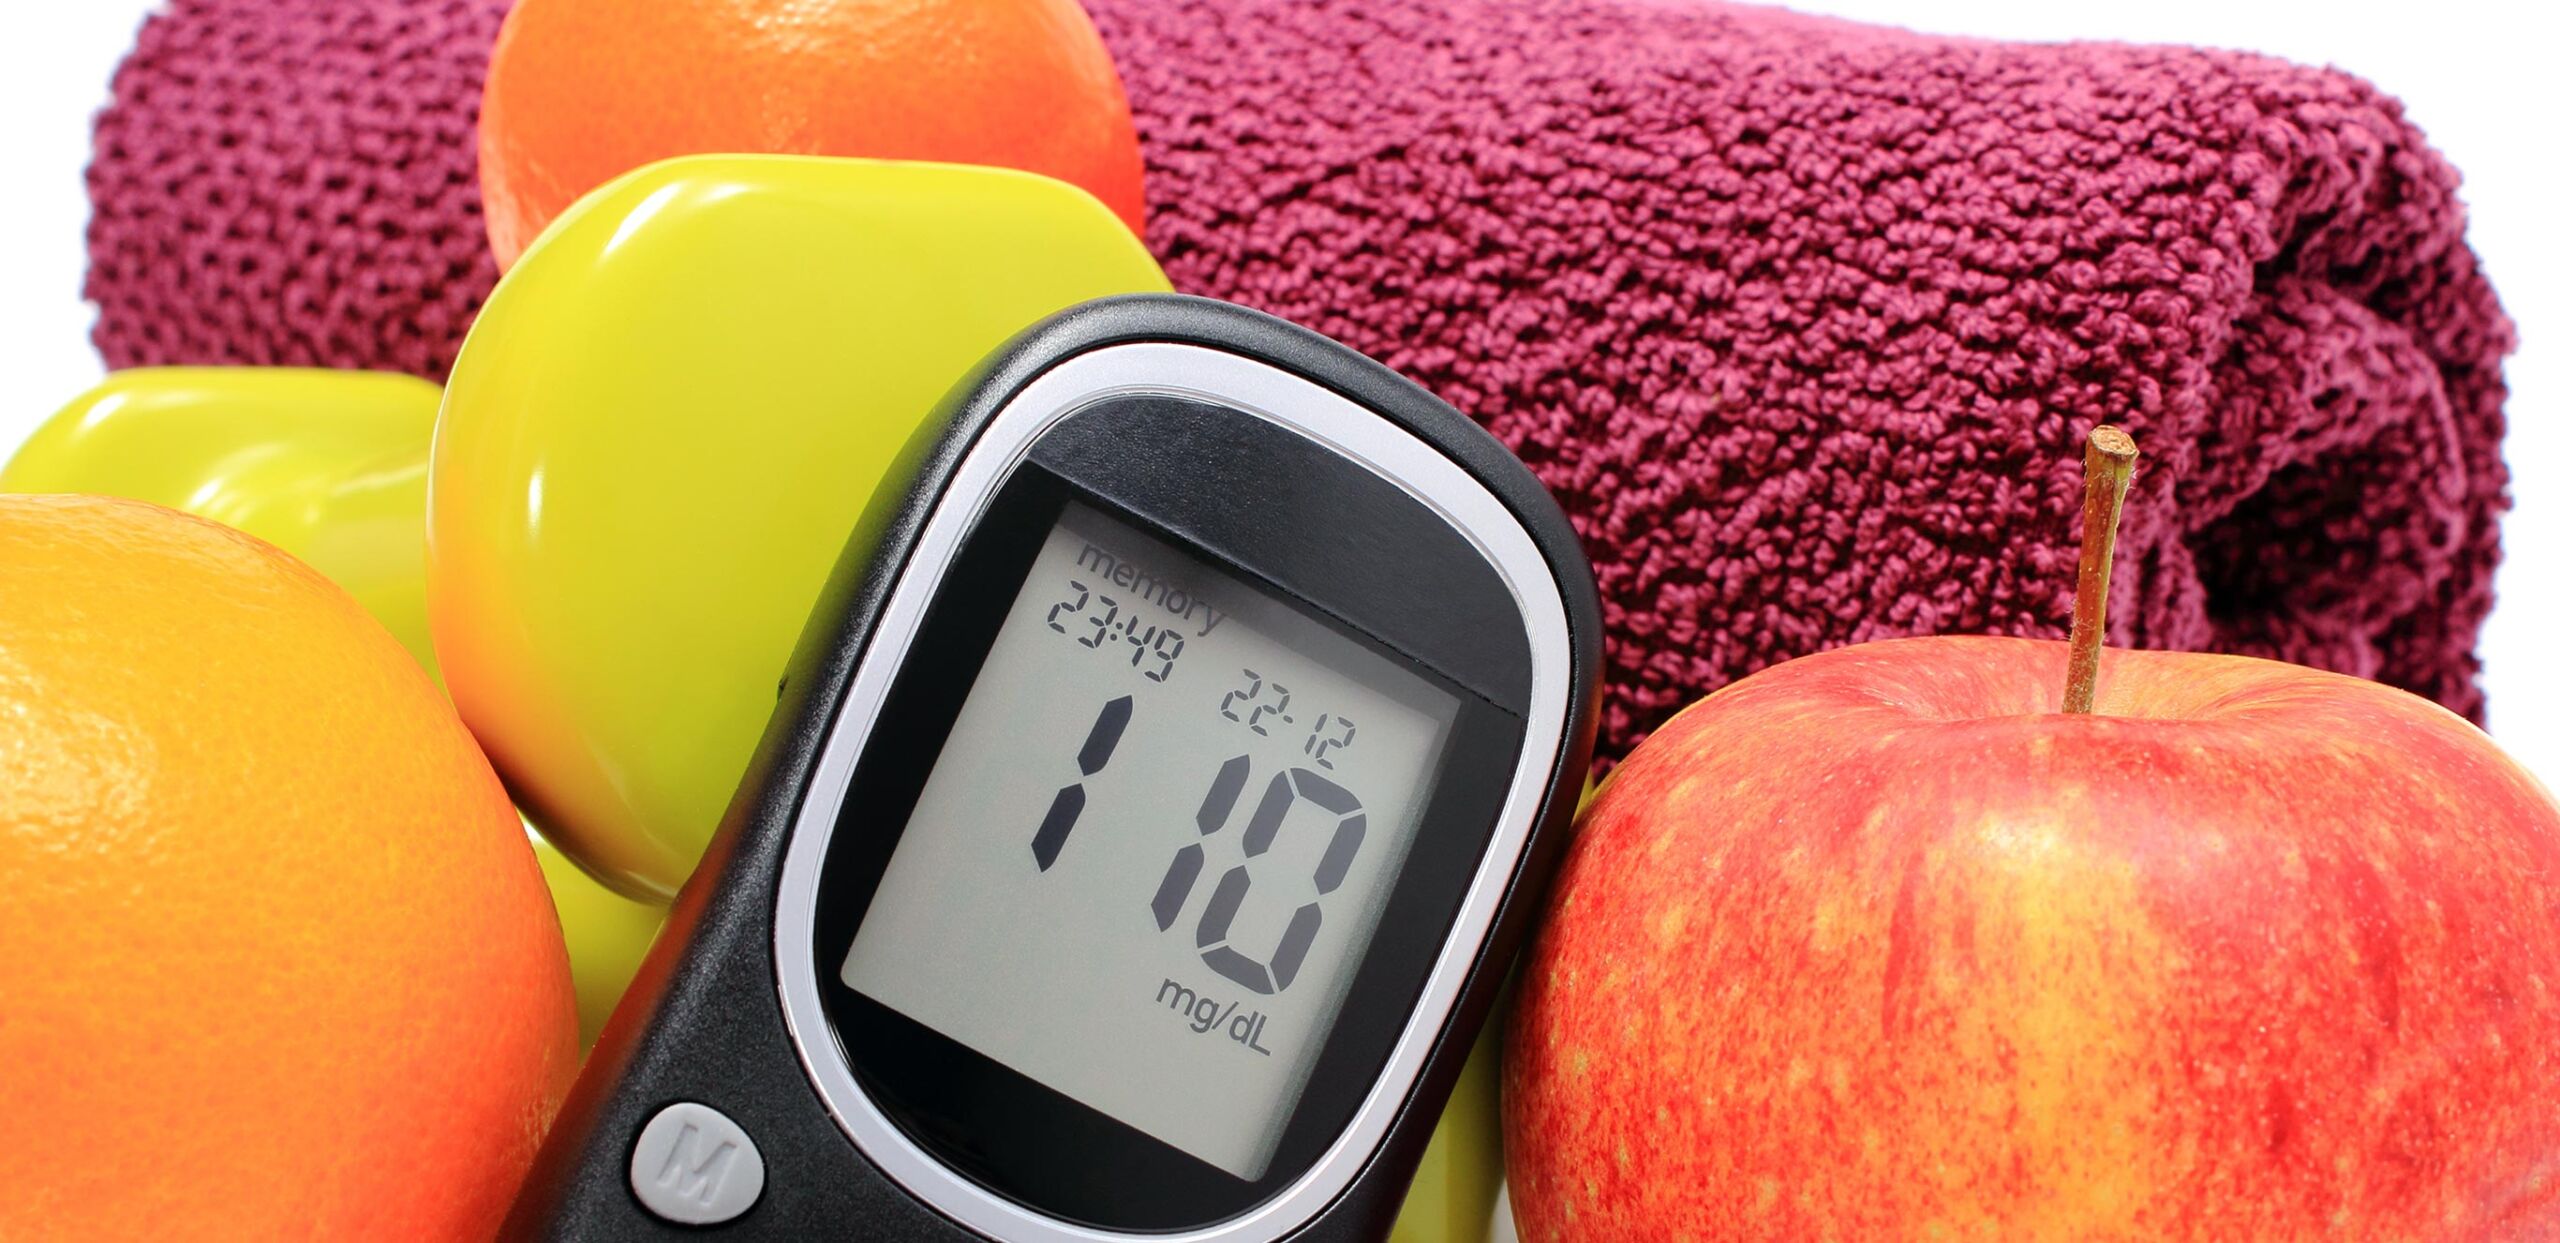 Blood-sugar monitor with apples, Cooley Dickinson Medical Group Diabetes Center, Northampton, MA 01060..